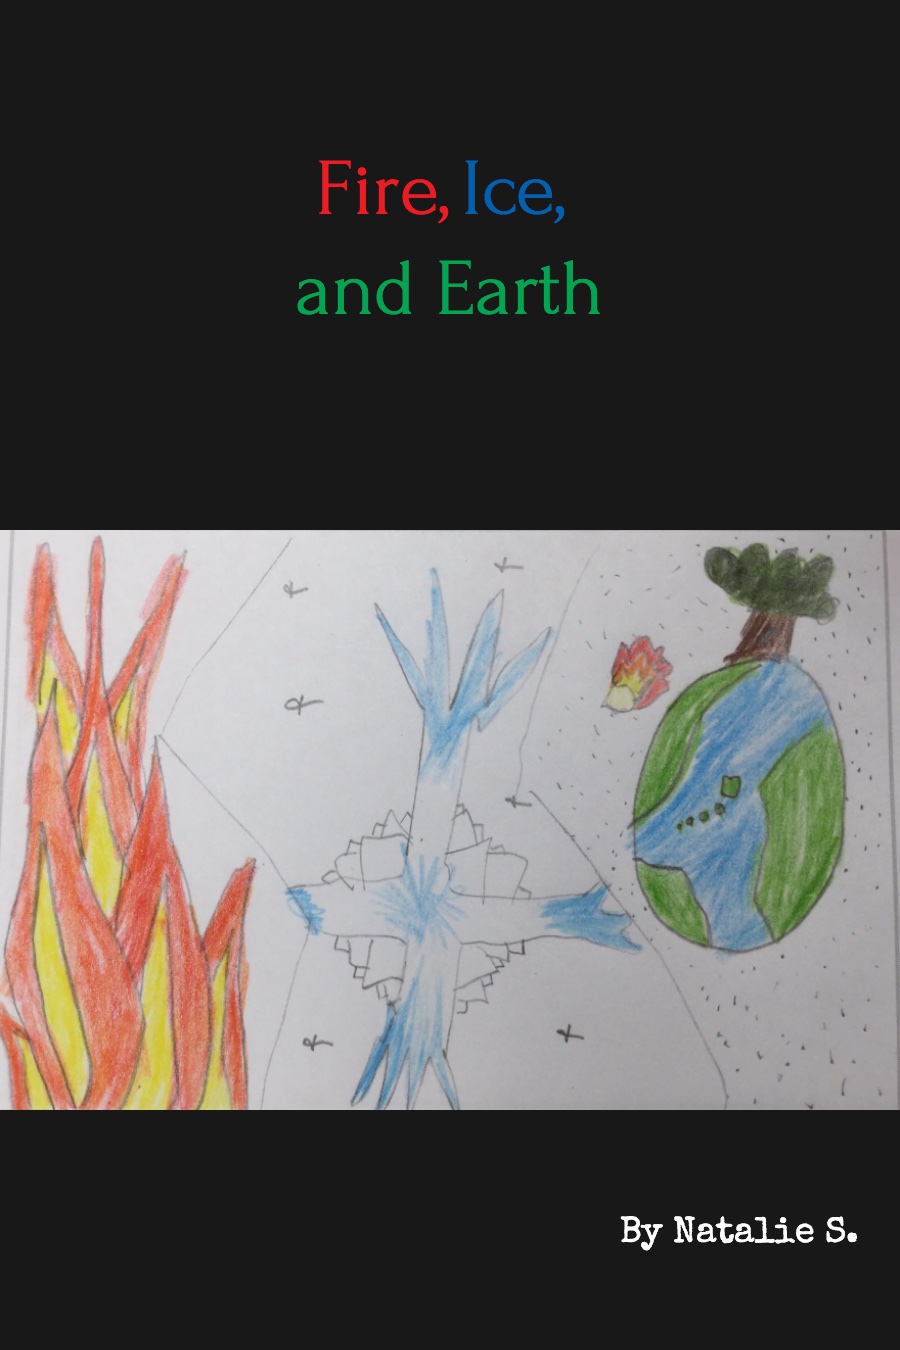 Fire Ice and Earth by Natalie S